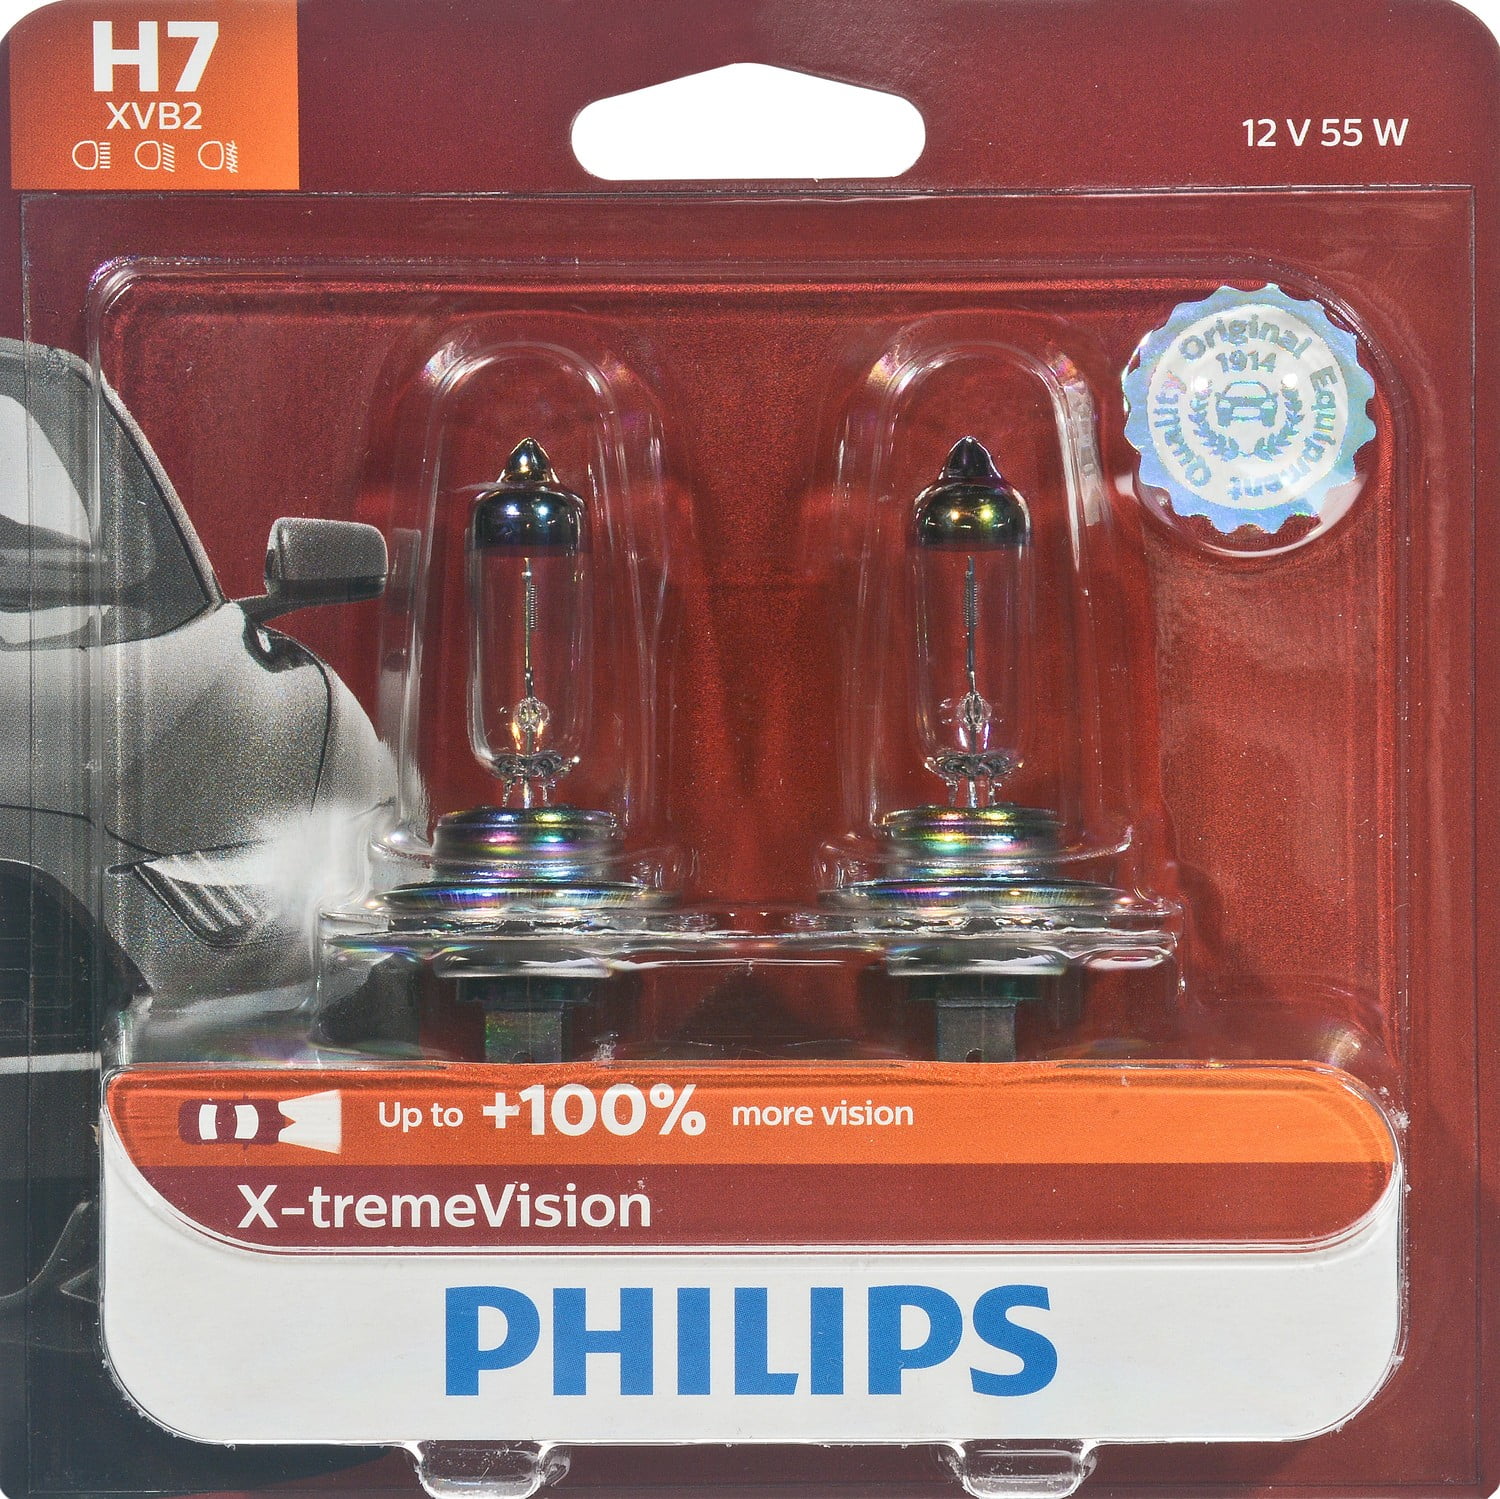 Philips H7 12972 XV 12V 55W PX26d X-tremeVision Upgrade Bulbs with +100%  More Light 12972XVS2 Pack of 2 Bulbs 